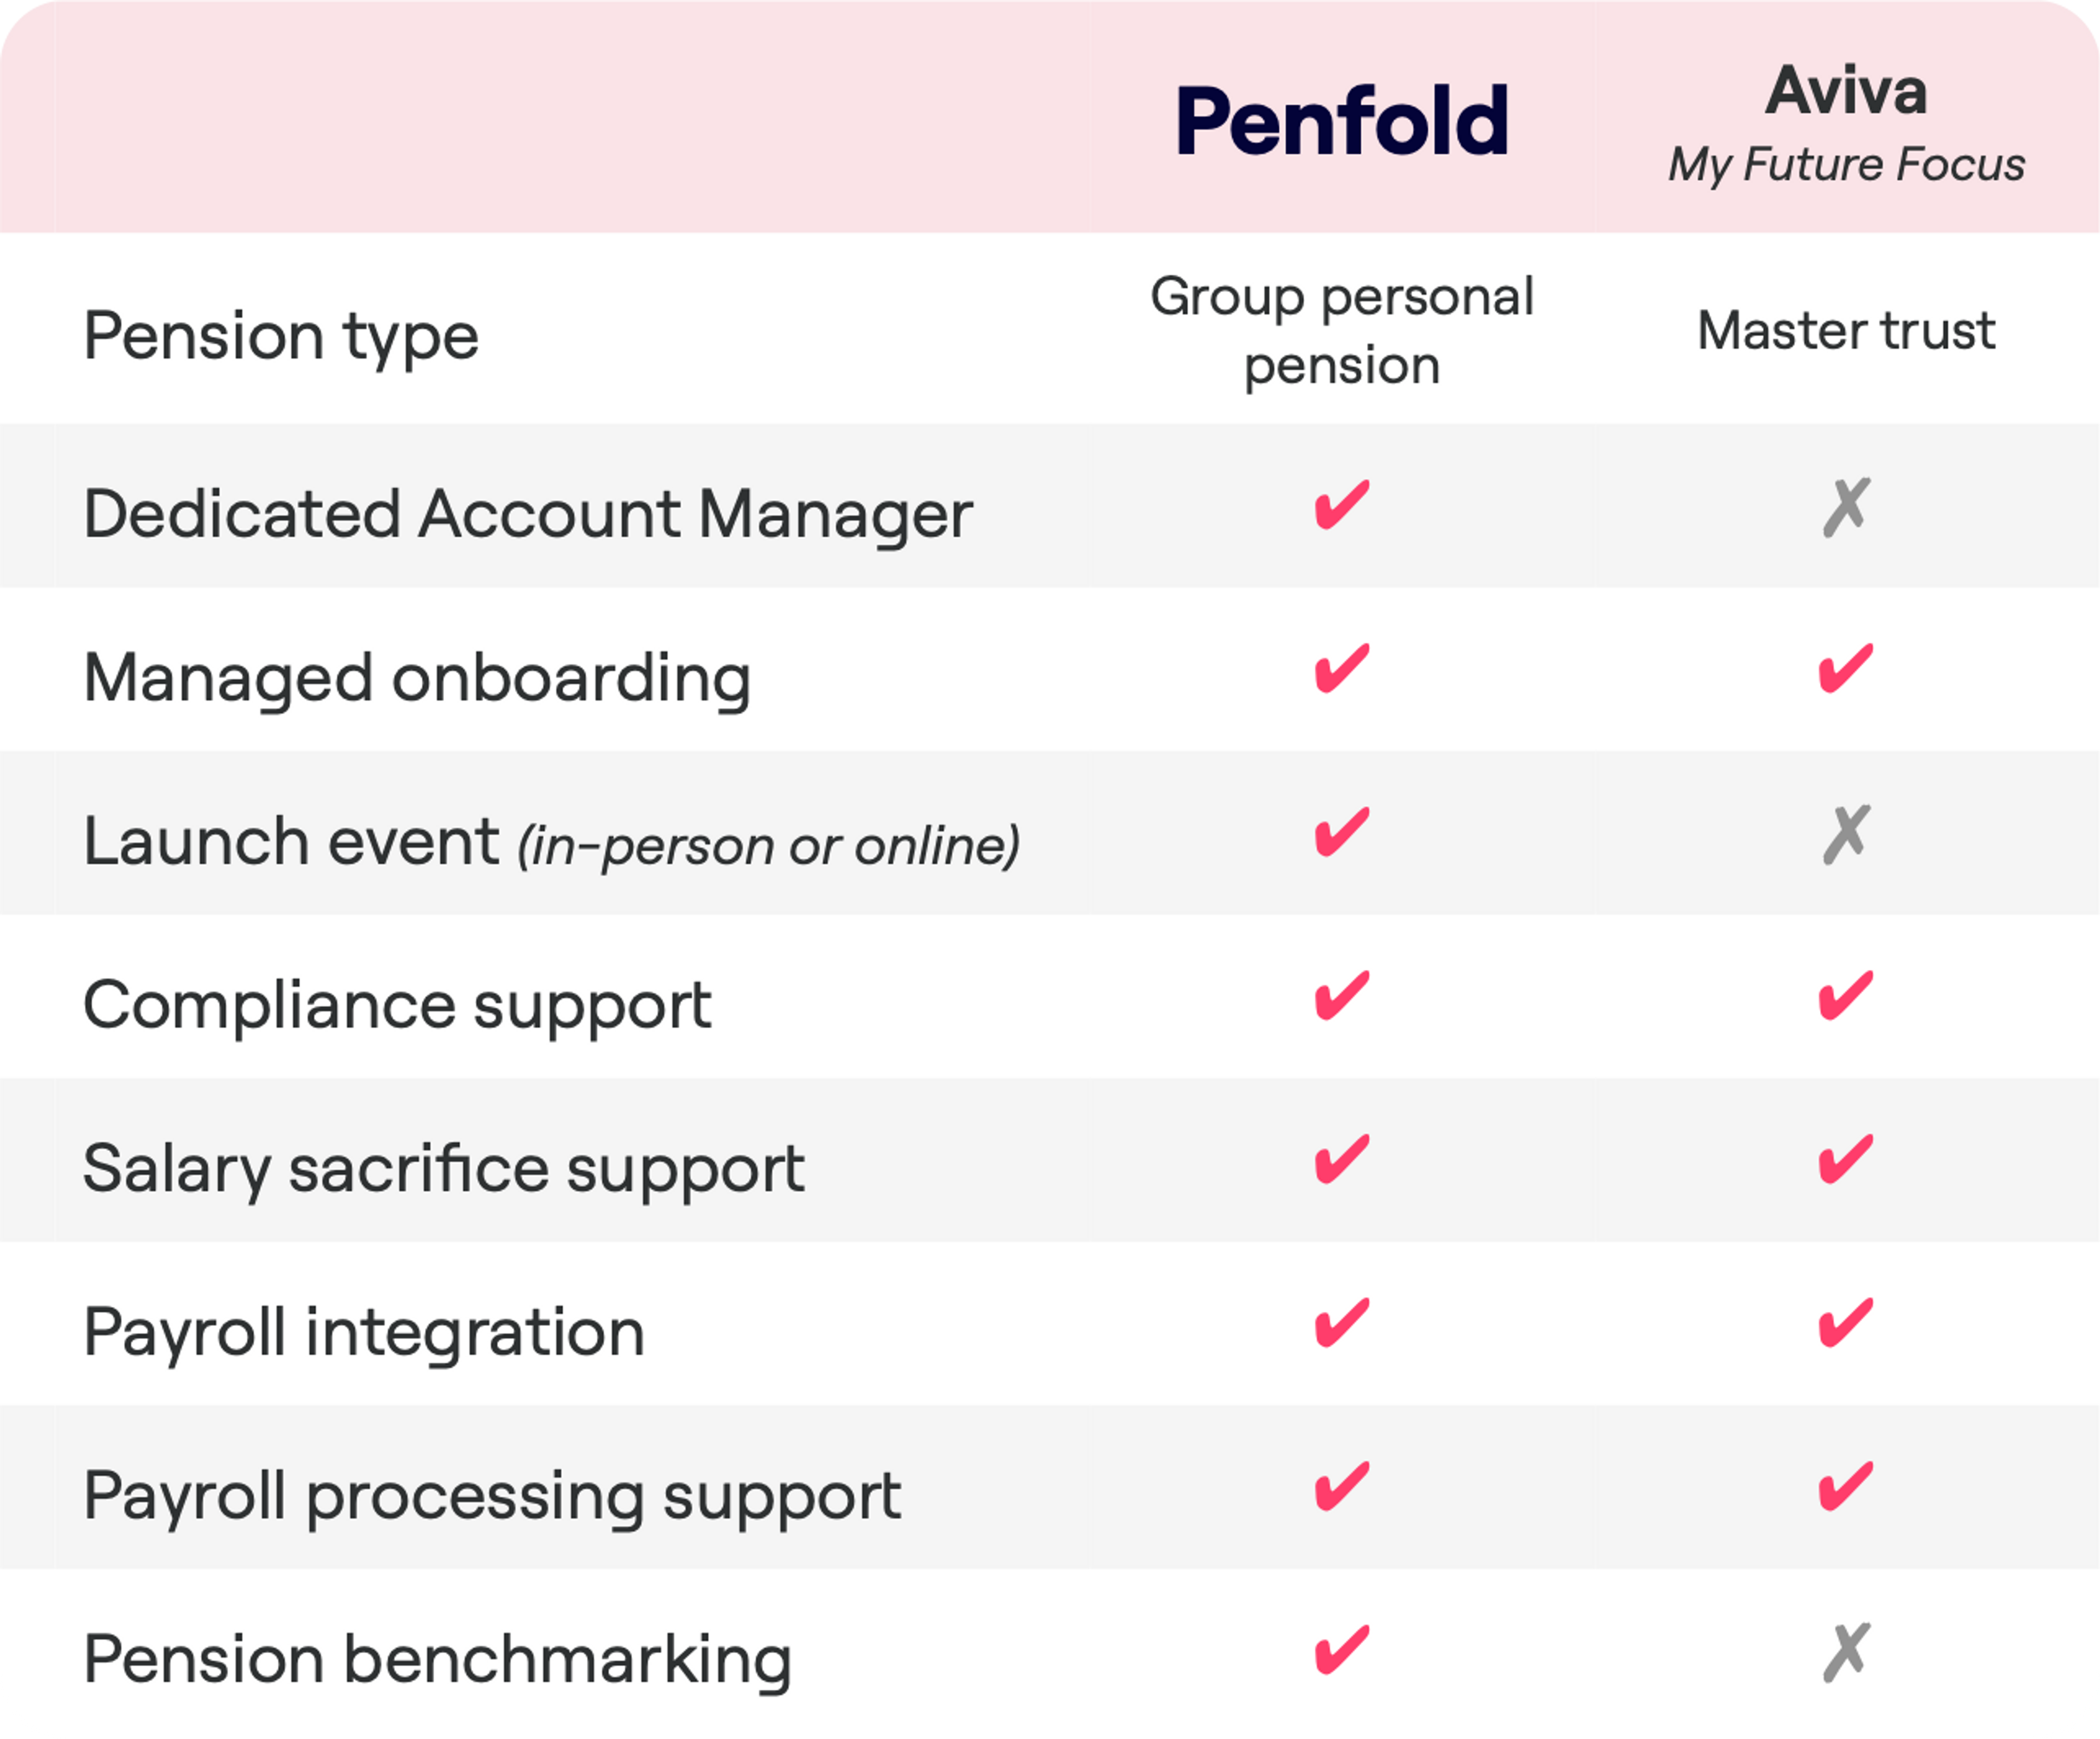 A comparison table between Penfold's Group personal pension and Aviva's My Future Focus Master trust. Both offer Managed onboarding, Compliance support, Salary sacrifice support, Payroll integration, and Payroll processing support. Penfold additionally offers a Dedicated Account Manager, Pension benchmarking and a Launch event, which Aviva's service does not.